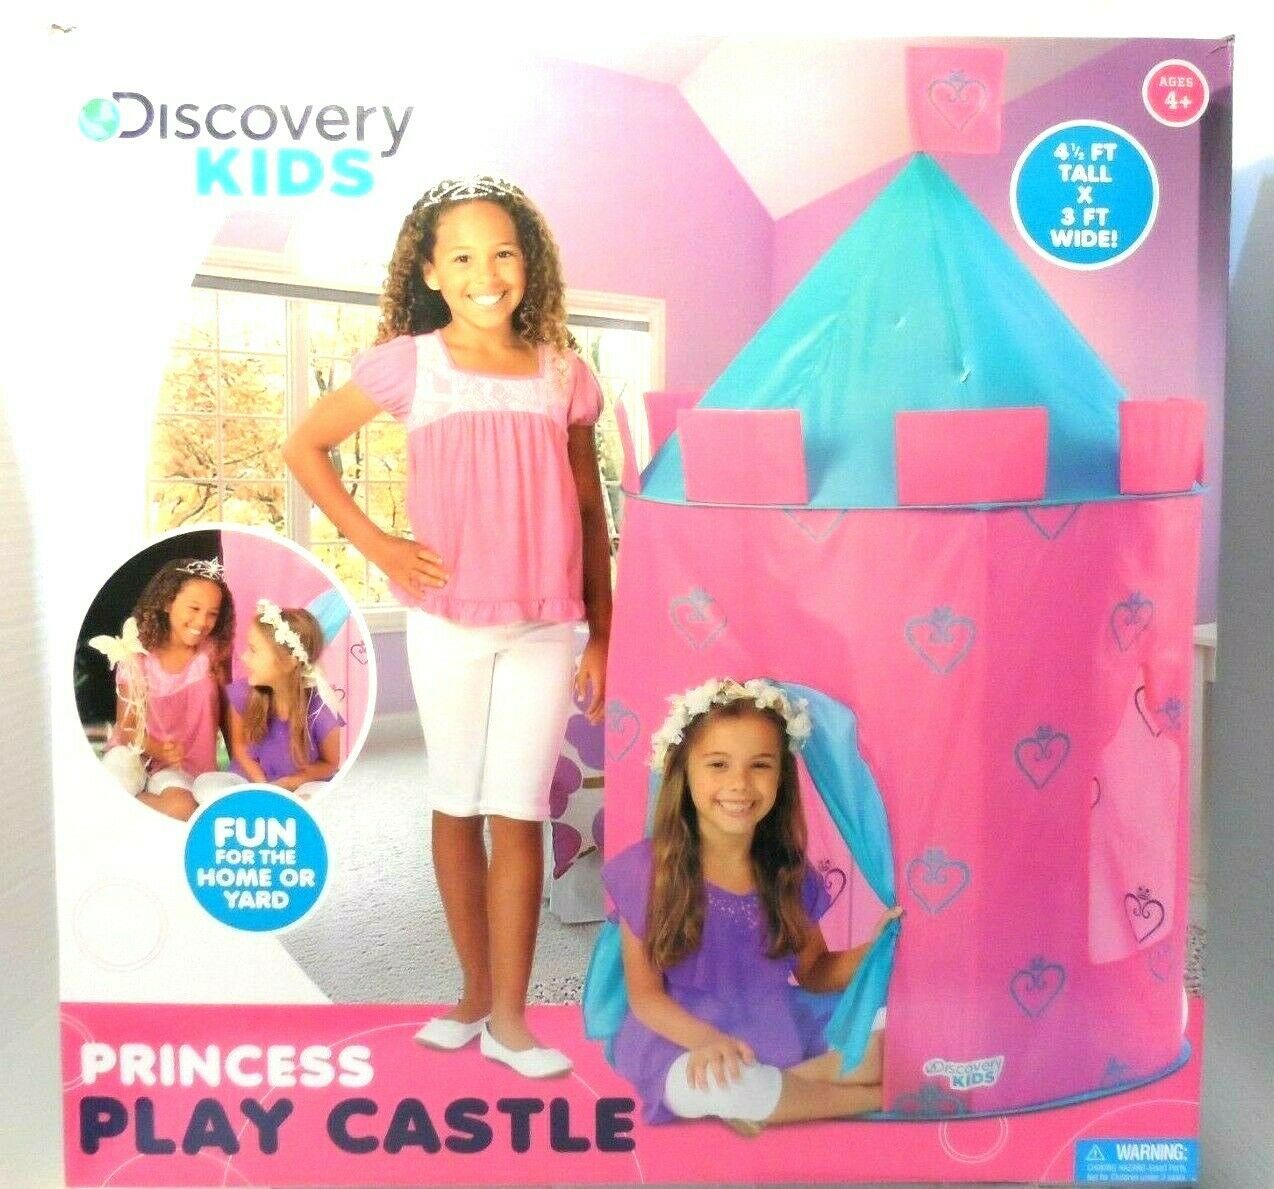 Discovery Kids Princess Play Castle, Indoor Outdoor Tent Pink & Blue NEW  - $28.03